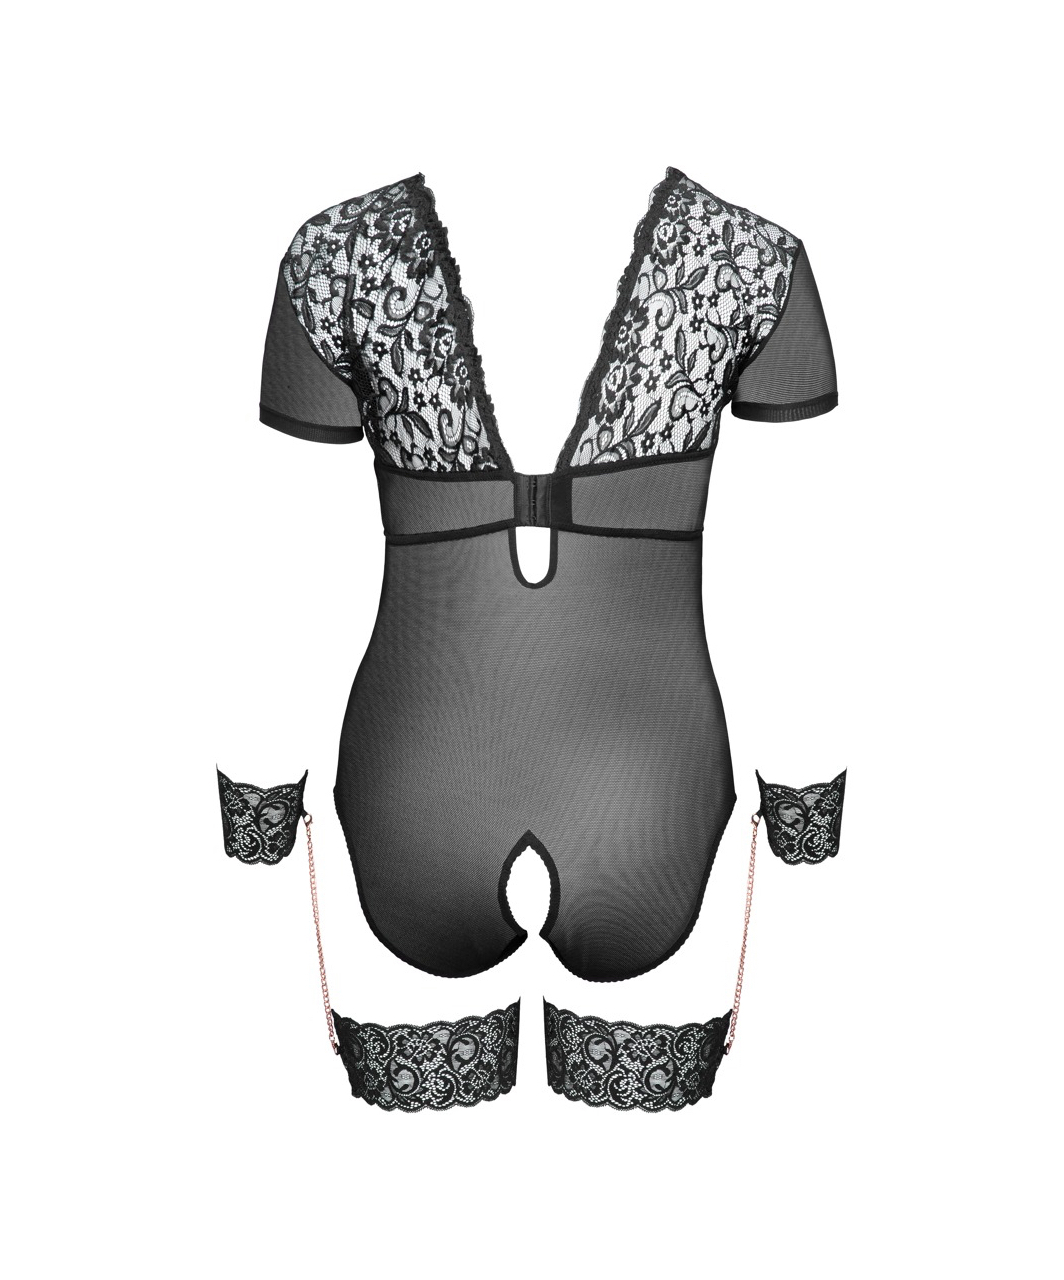 Cottelli Lingerie black sheer mesh crotchless bodysuit with wrist cuffs